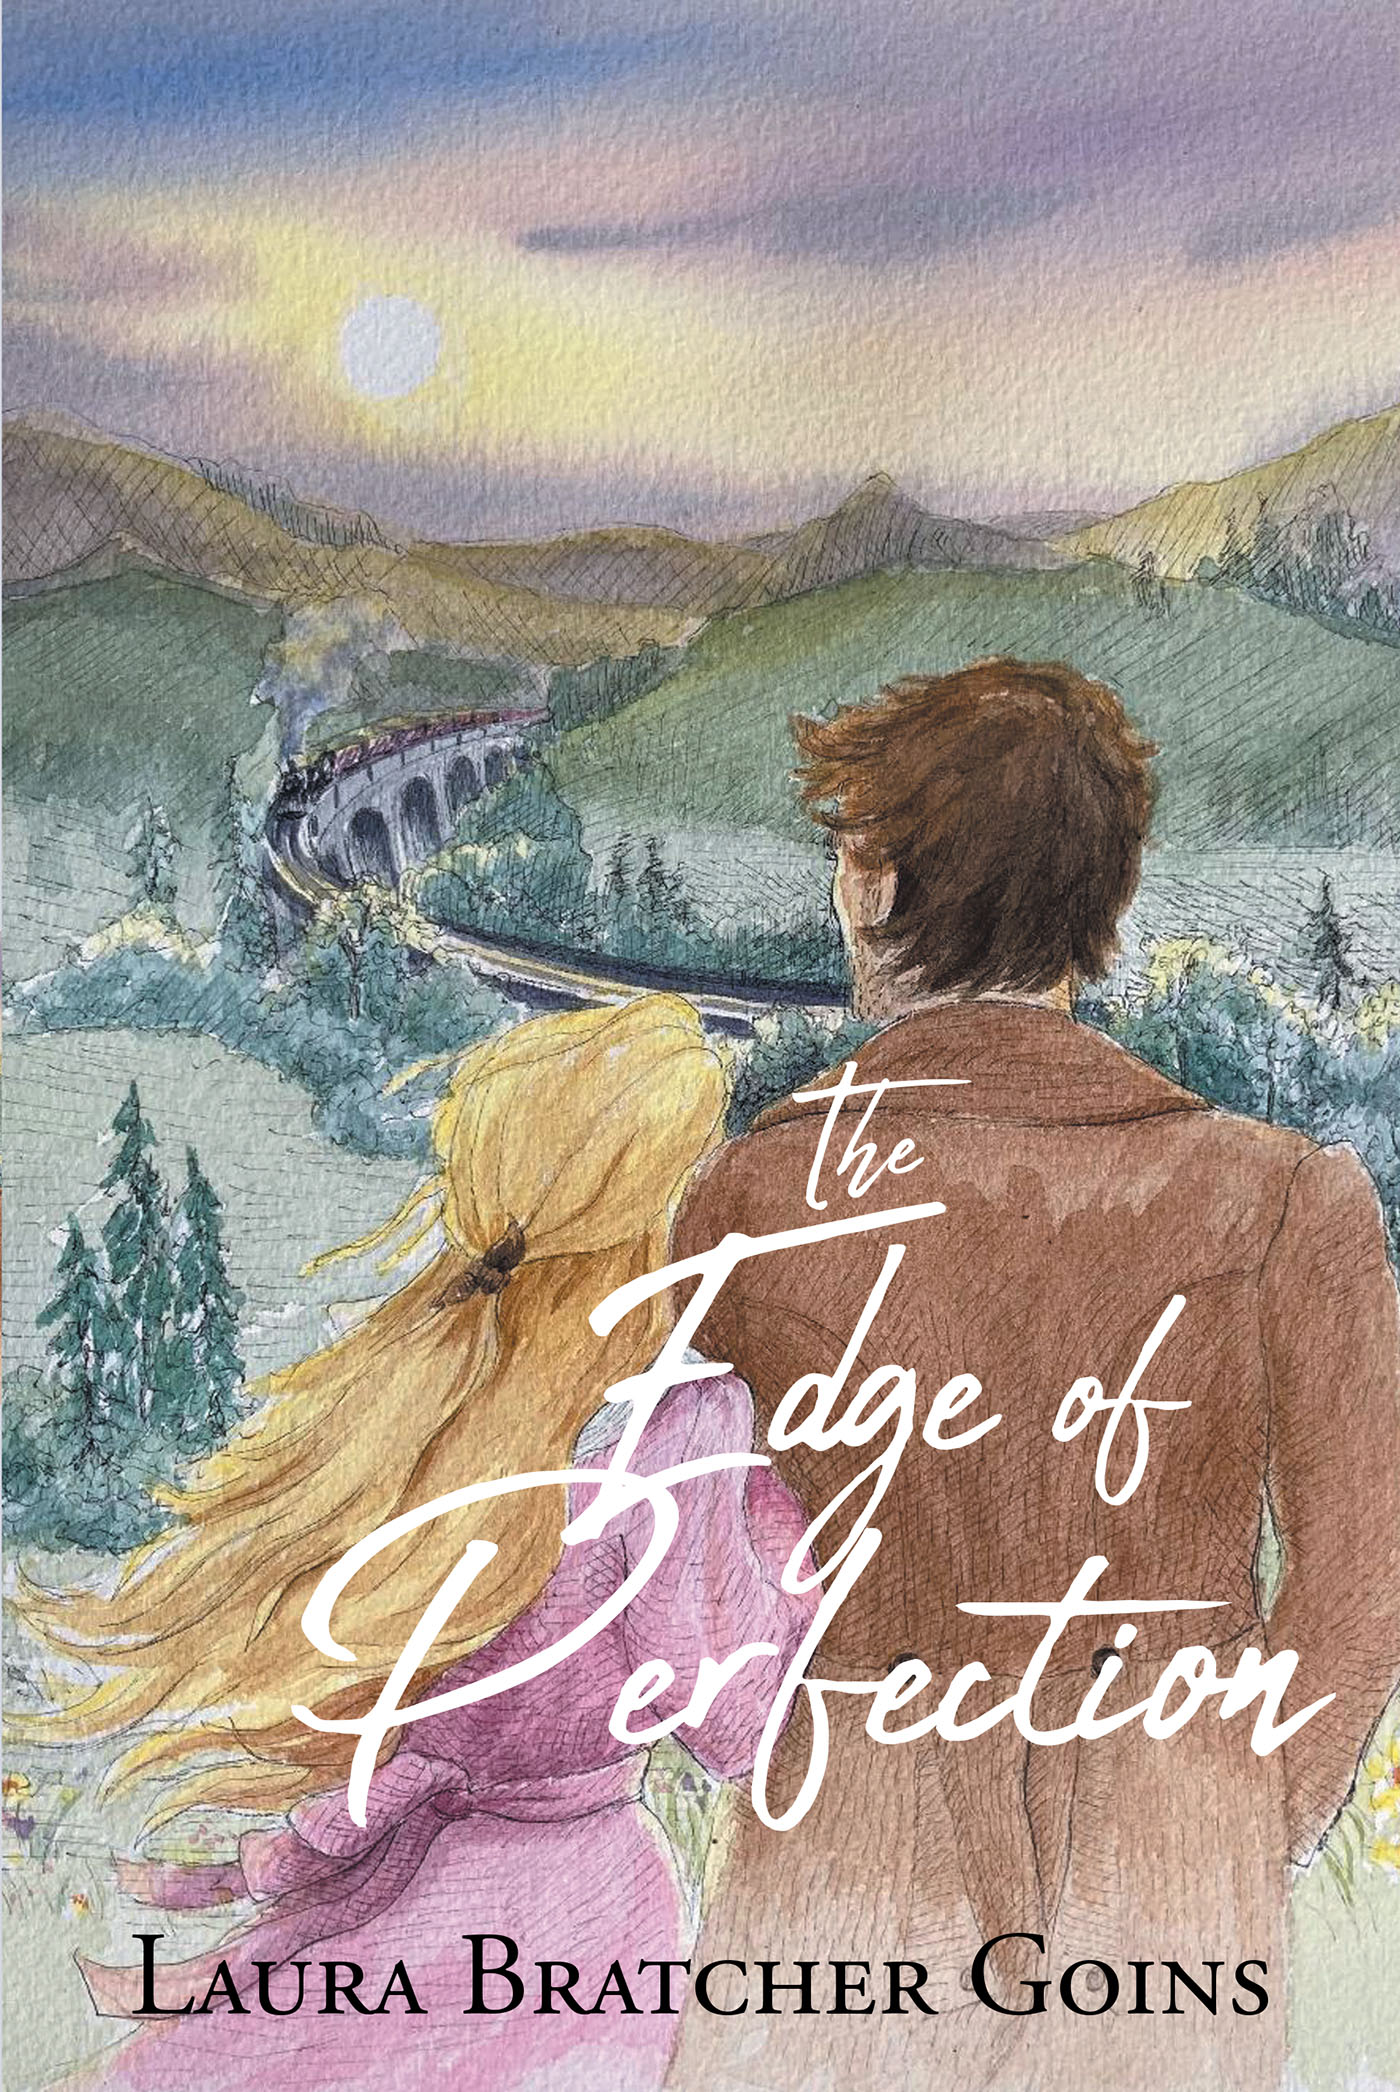 Laura Bratcher Goins’s Newly Released "The Edge of Perfection" is an Engaging Culmination to a Three-Part Tale of Faith, Family, and Discovery